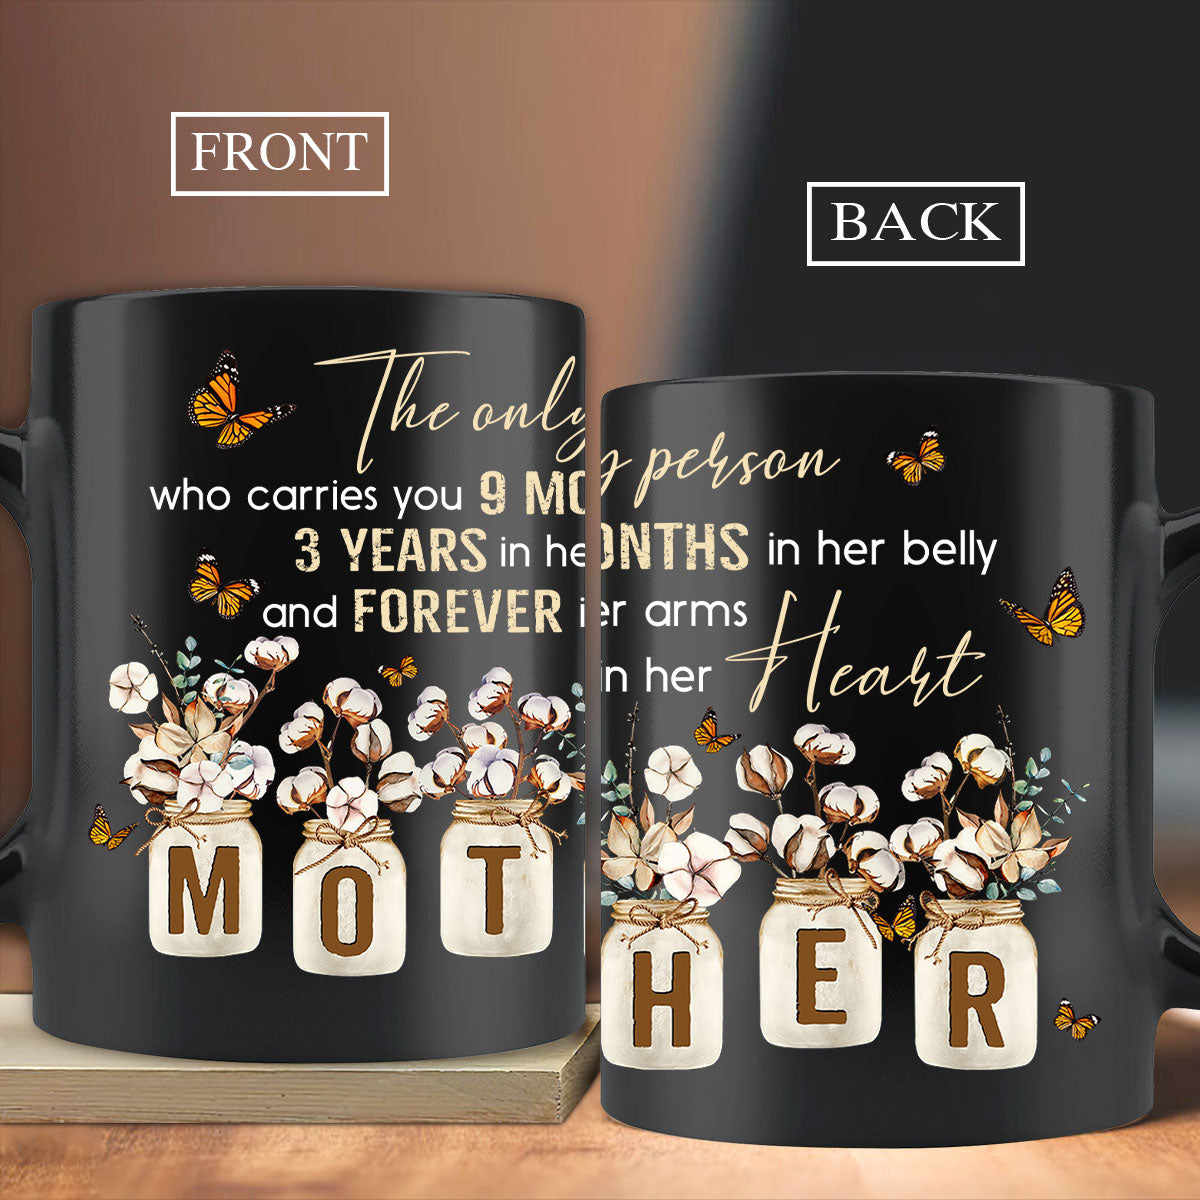 Gift For Mom Mug - Daughter to mom, Cotton flower, Mason jar, Monarch butterfly Mug - Gift For Mother's Day, Presents for Mom - The only person Mug